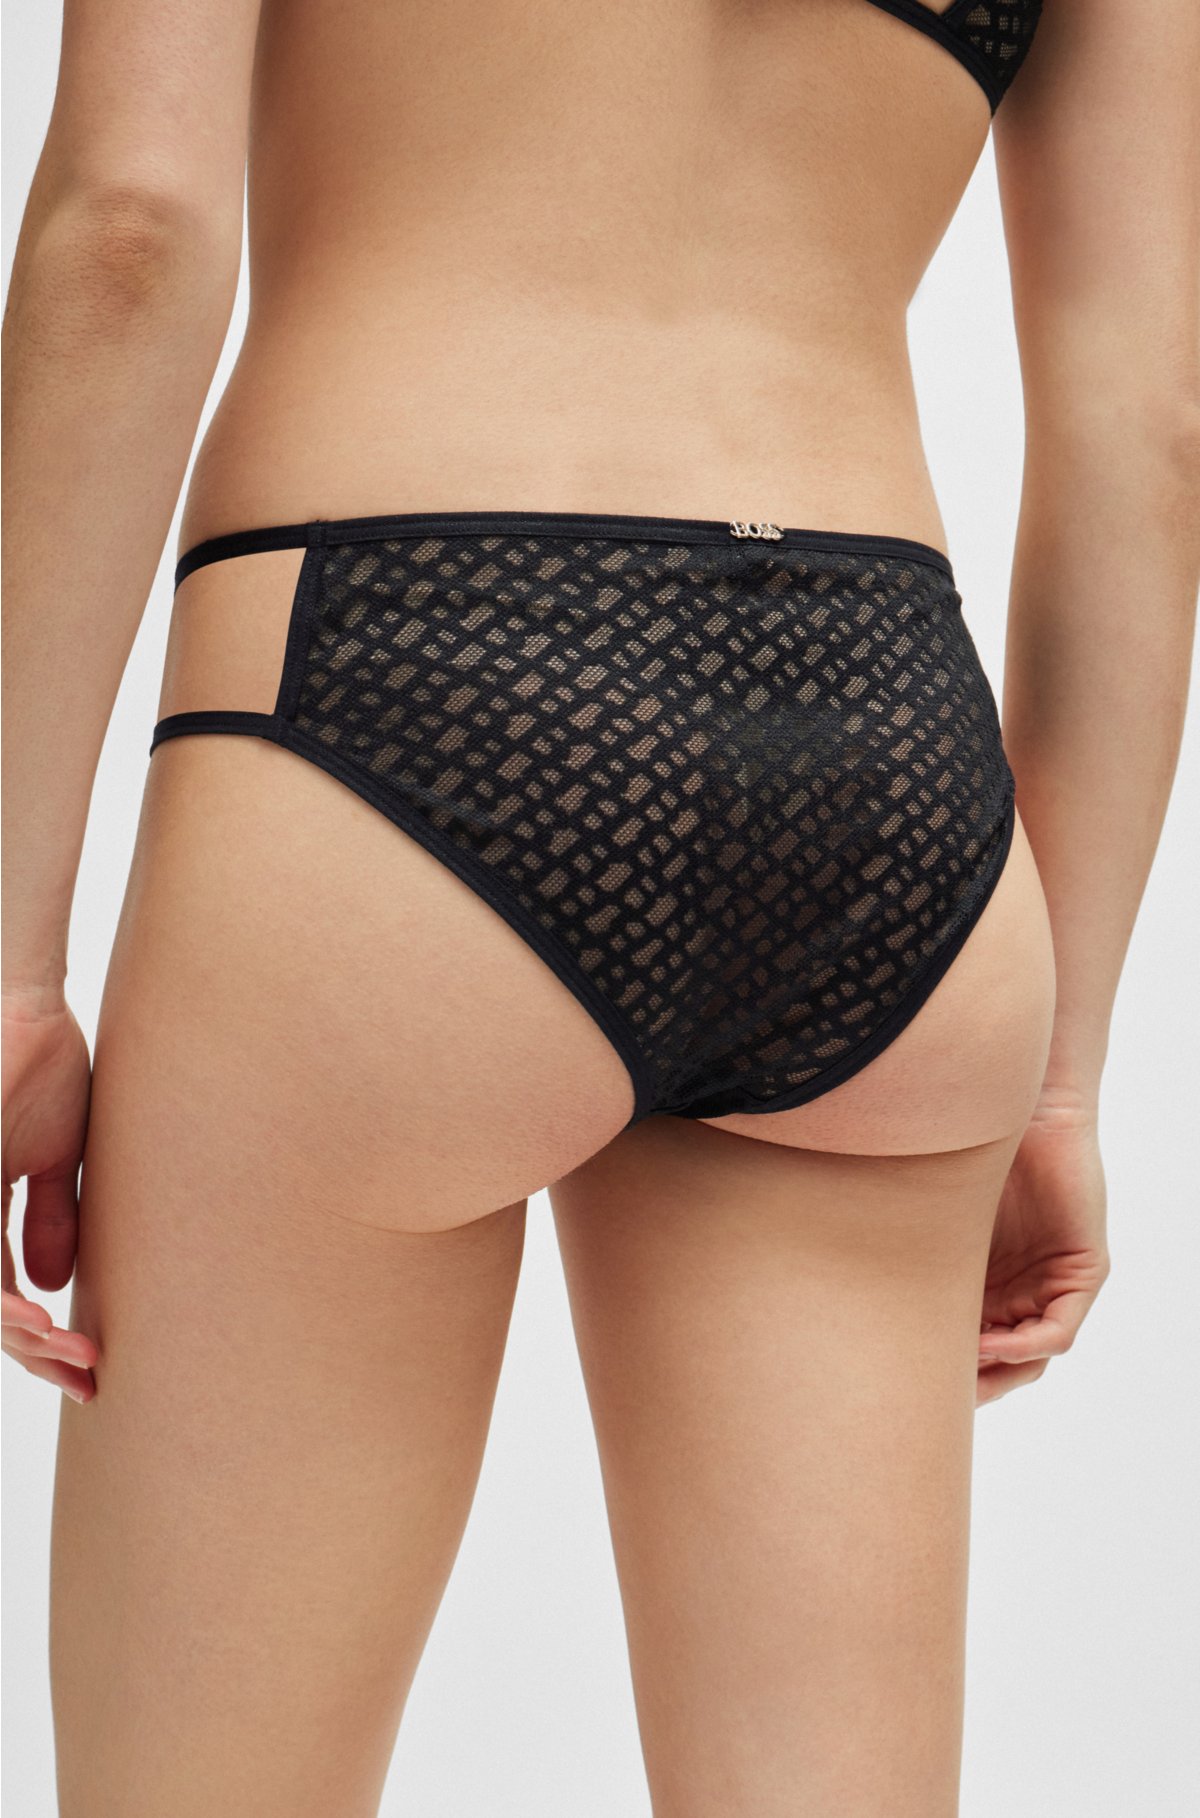 Monogram-lace briefs with gold-metal branding, Black